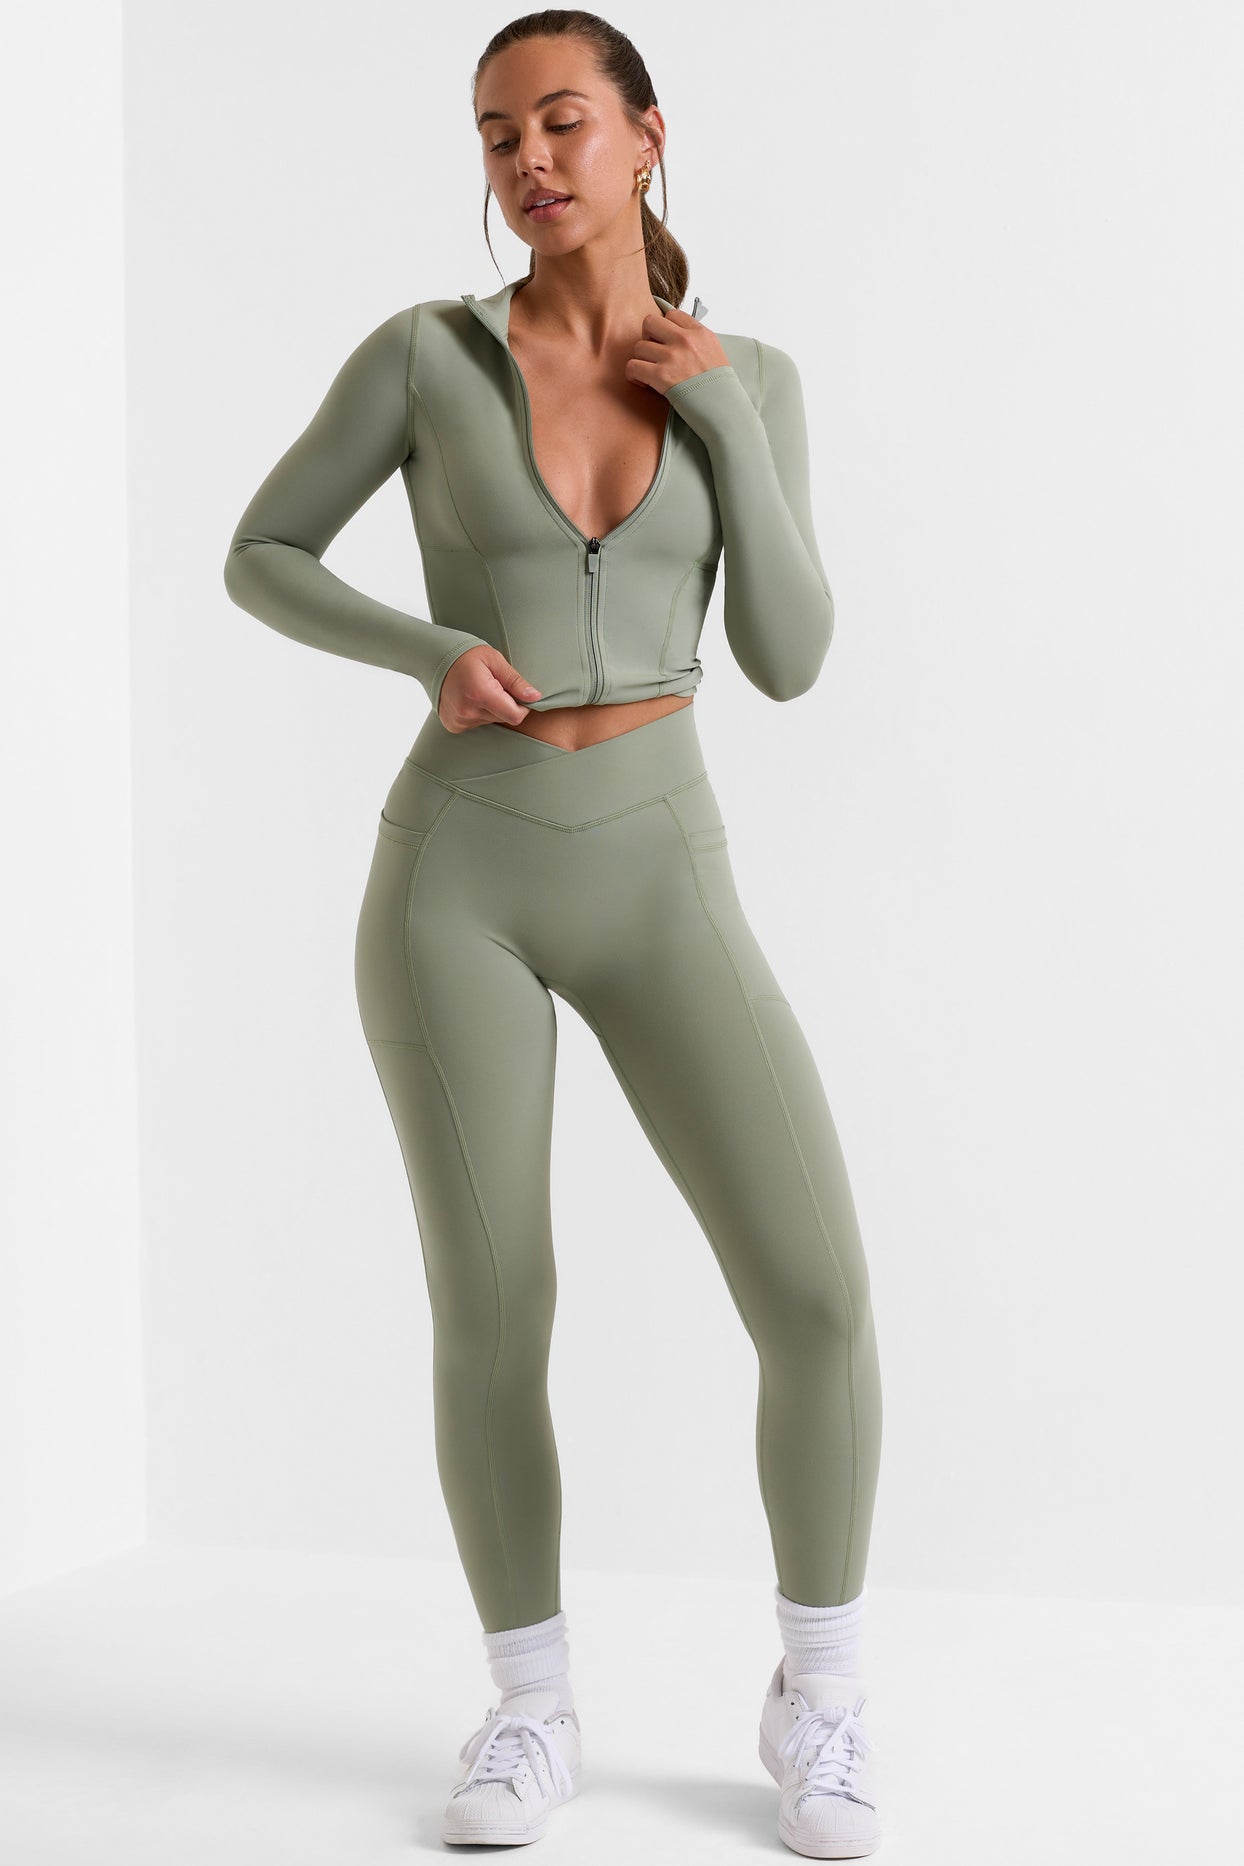 Petite Full Length Leggings with Pockets in Bamboo Green